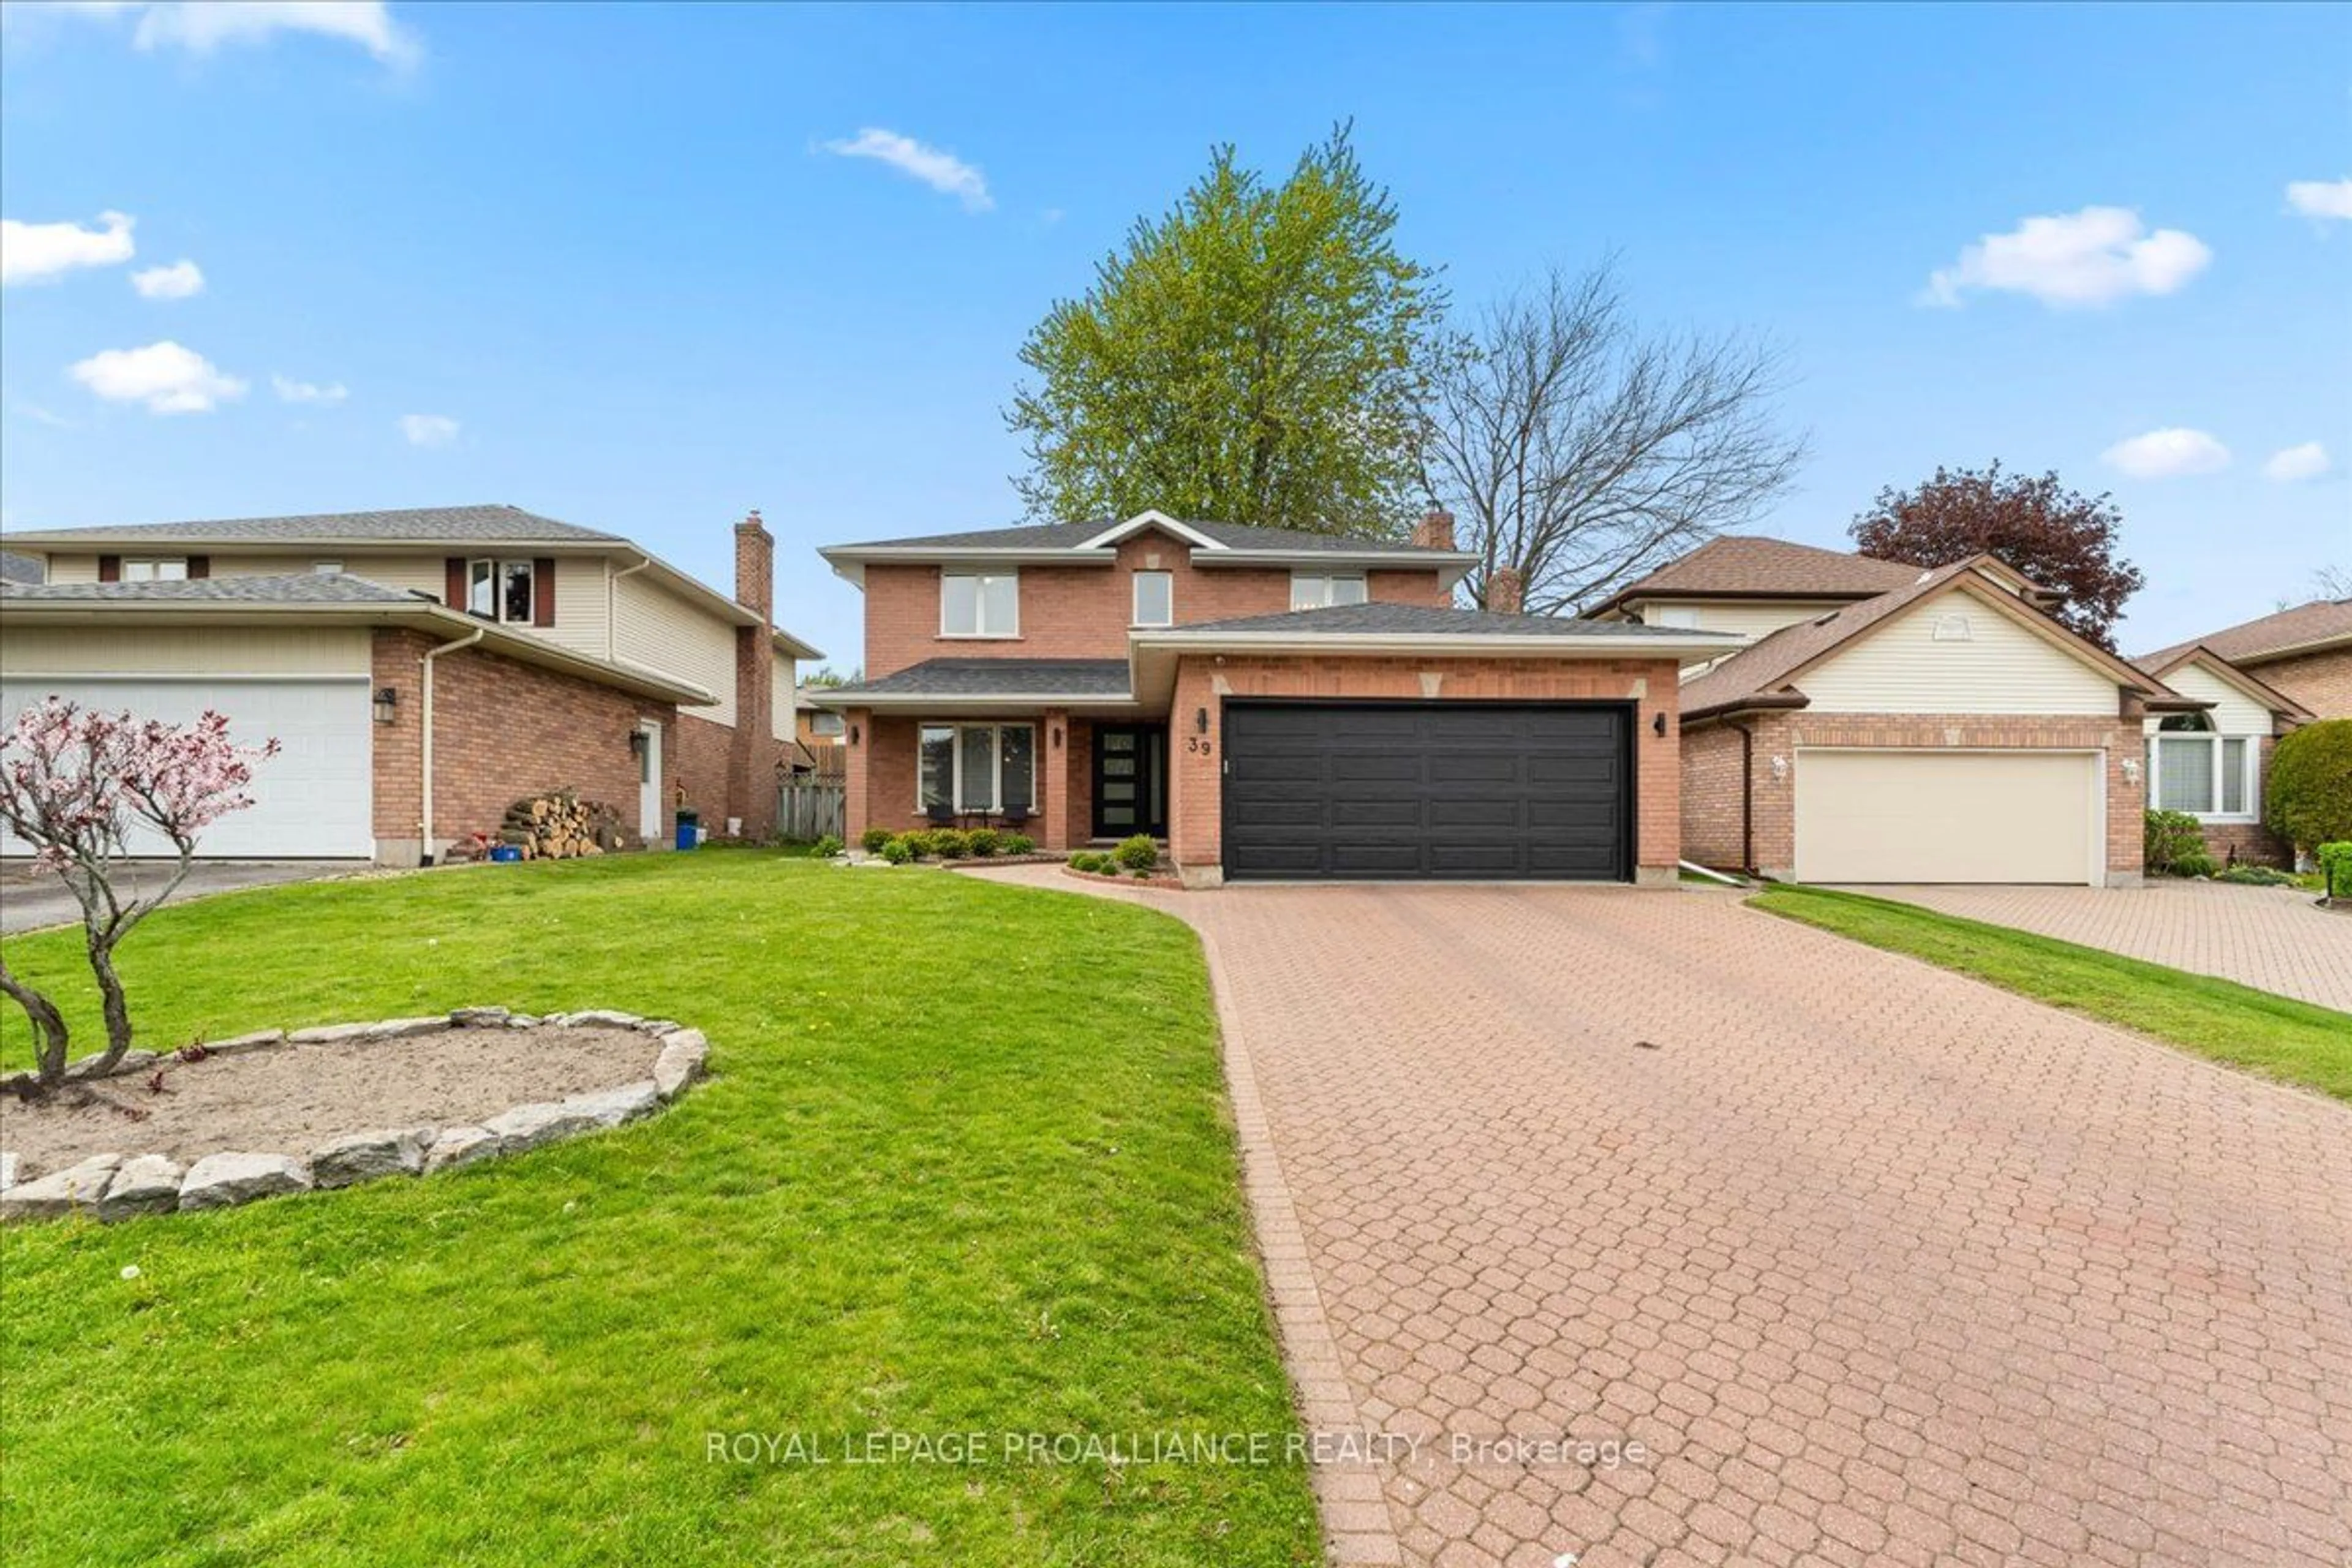 Home with brick exterior material for 39 Northumberland Blvd, Quinte West Ontario K8V 6L7